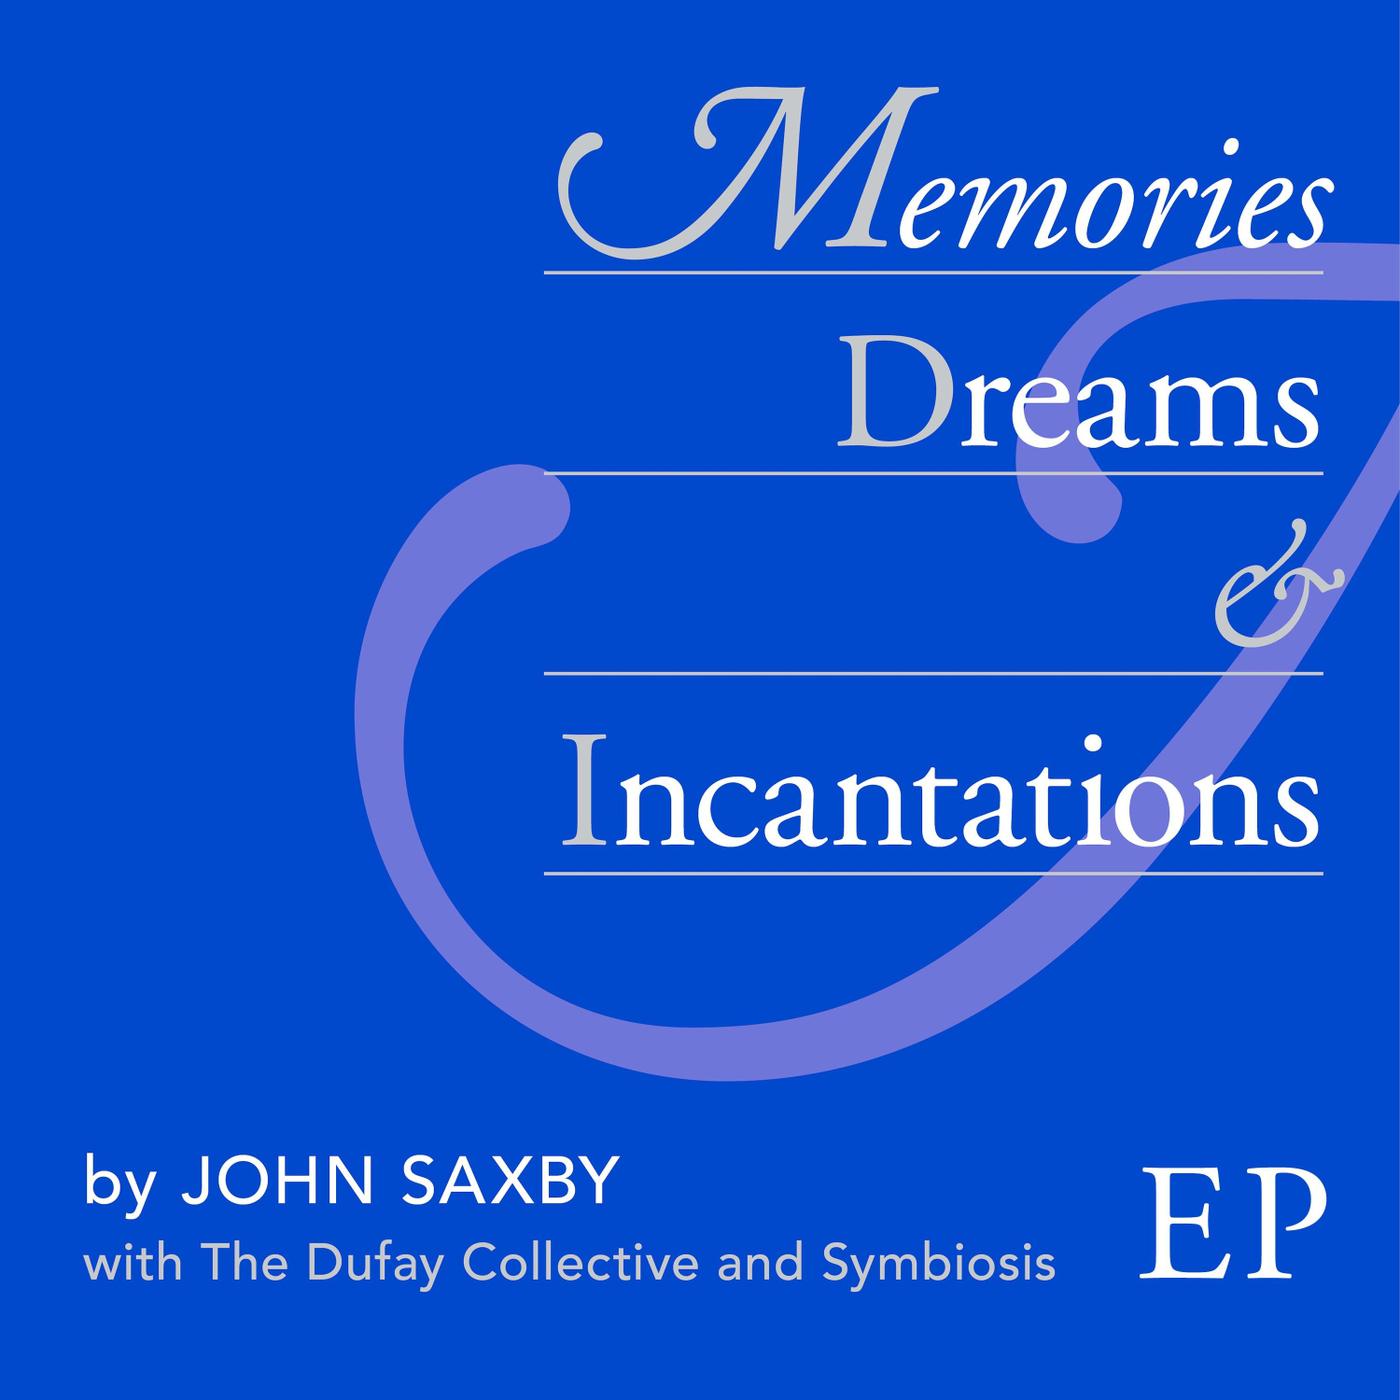 John Saxby - The Winds of the Universe (feat. The Dufay Collective, John Hackett & Symbiosis)